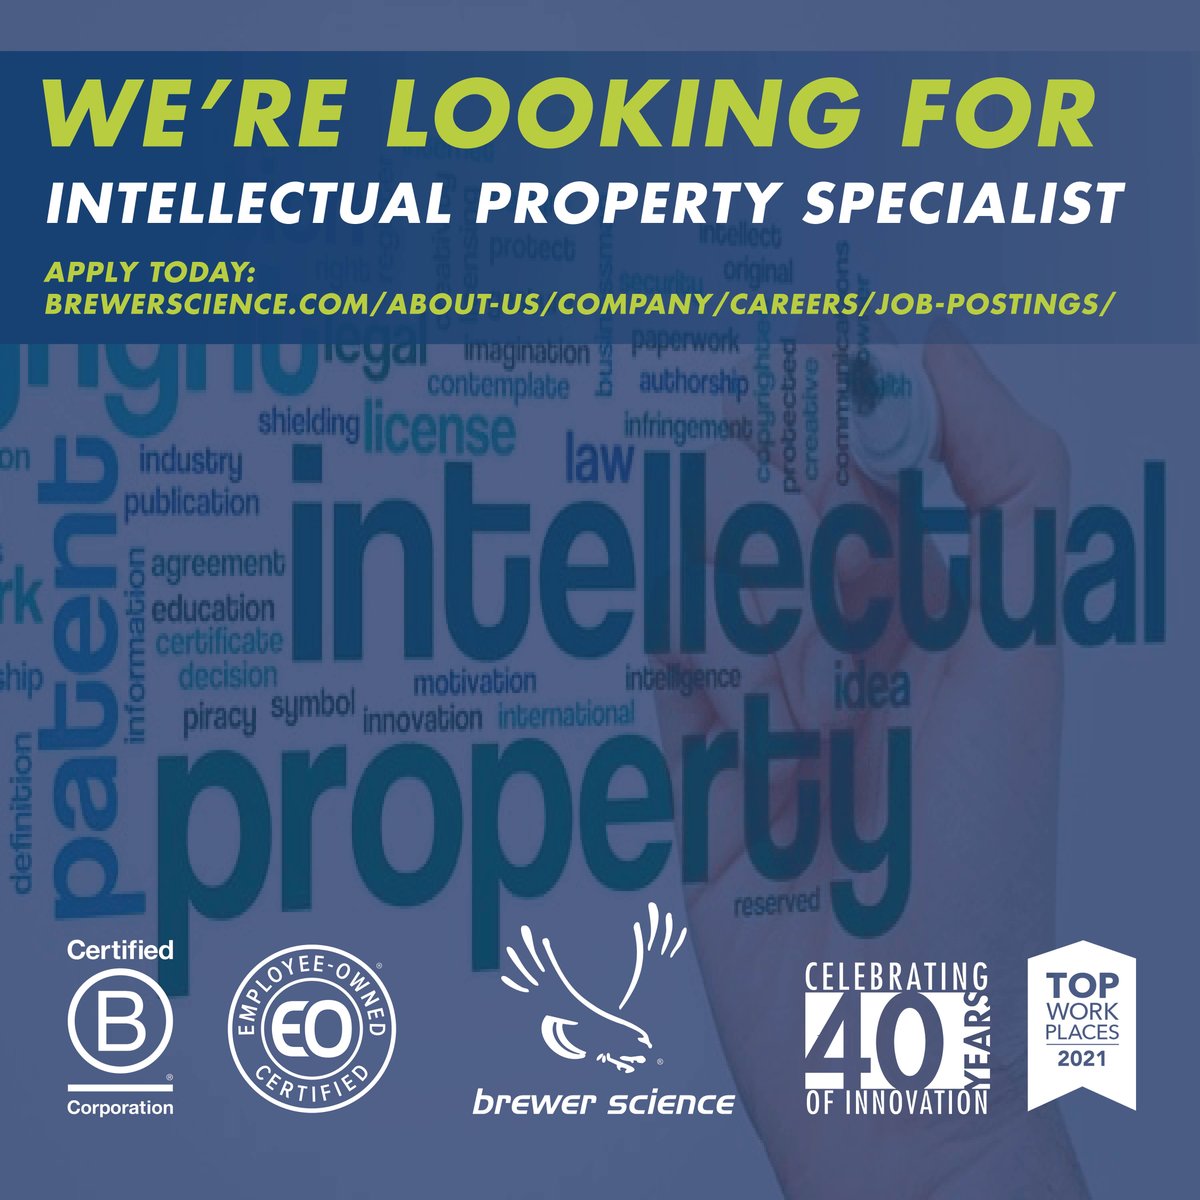 test Twitter Media - Brewer Science is looking for an Intellectual Property Specialist to join our legal team in Rolla, MO. Learn more about the position and other current job openings by visiting : https://t.co/761LlVPA5e
Brewer Science is proud to be @certified_eo and @bcorpuscan https://t.co/ccI9aJ03UK